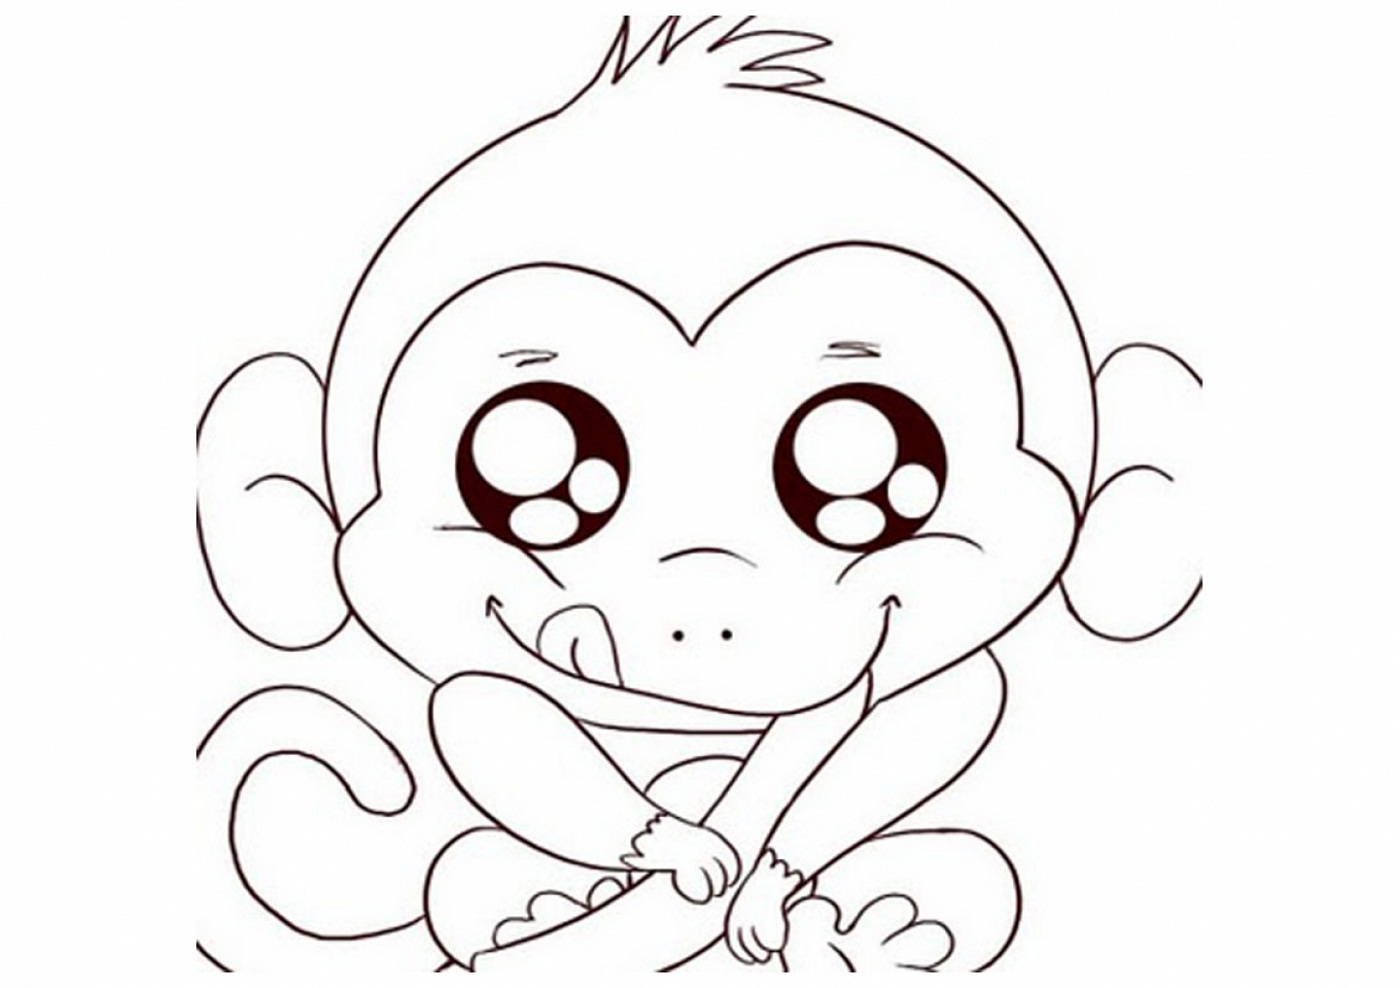 Coloring Pages of Monkeys Printable   Activity Shelter